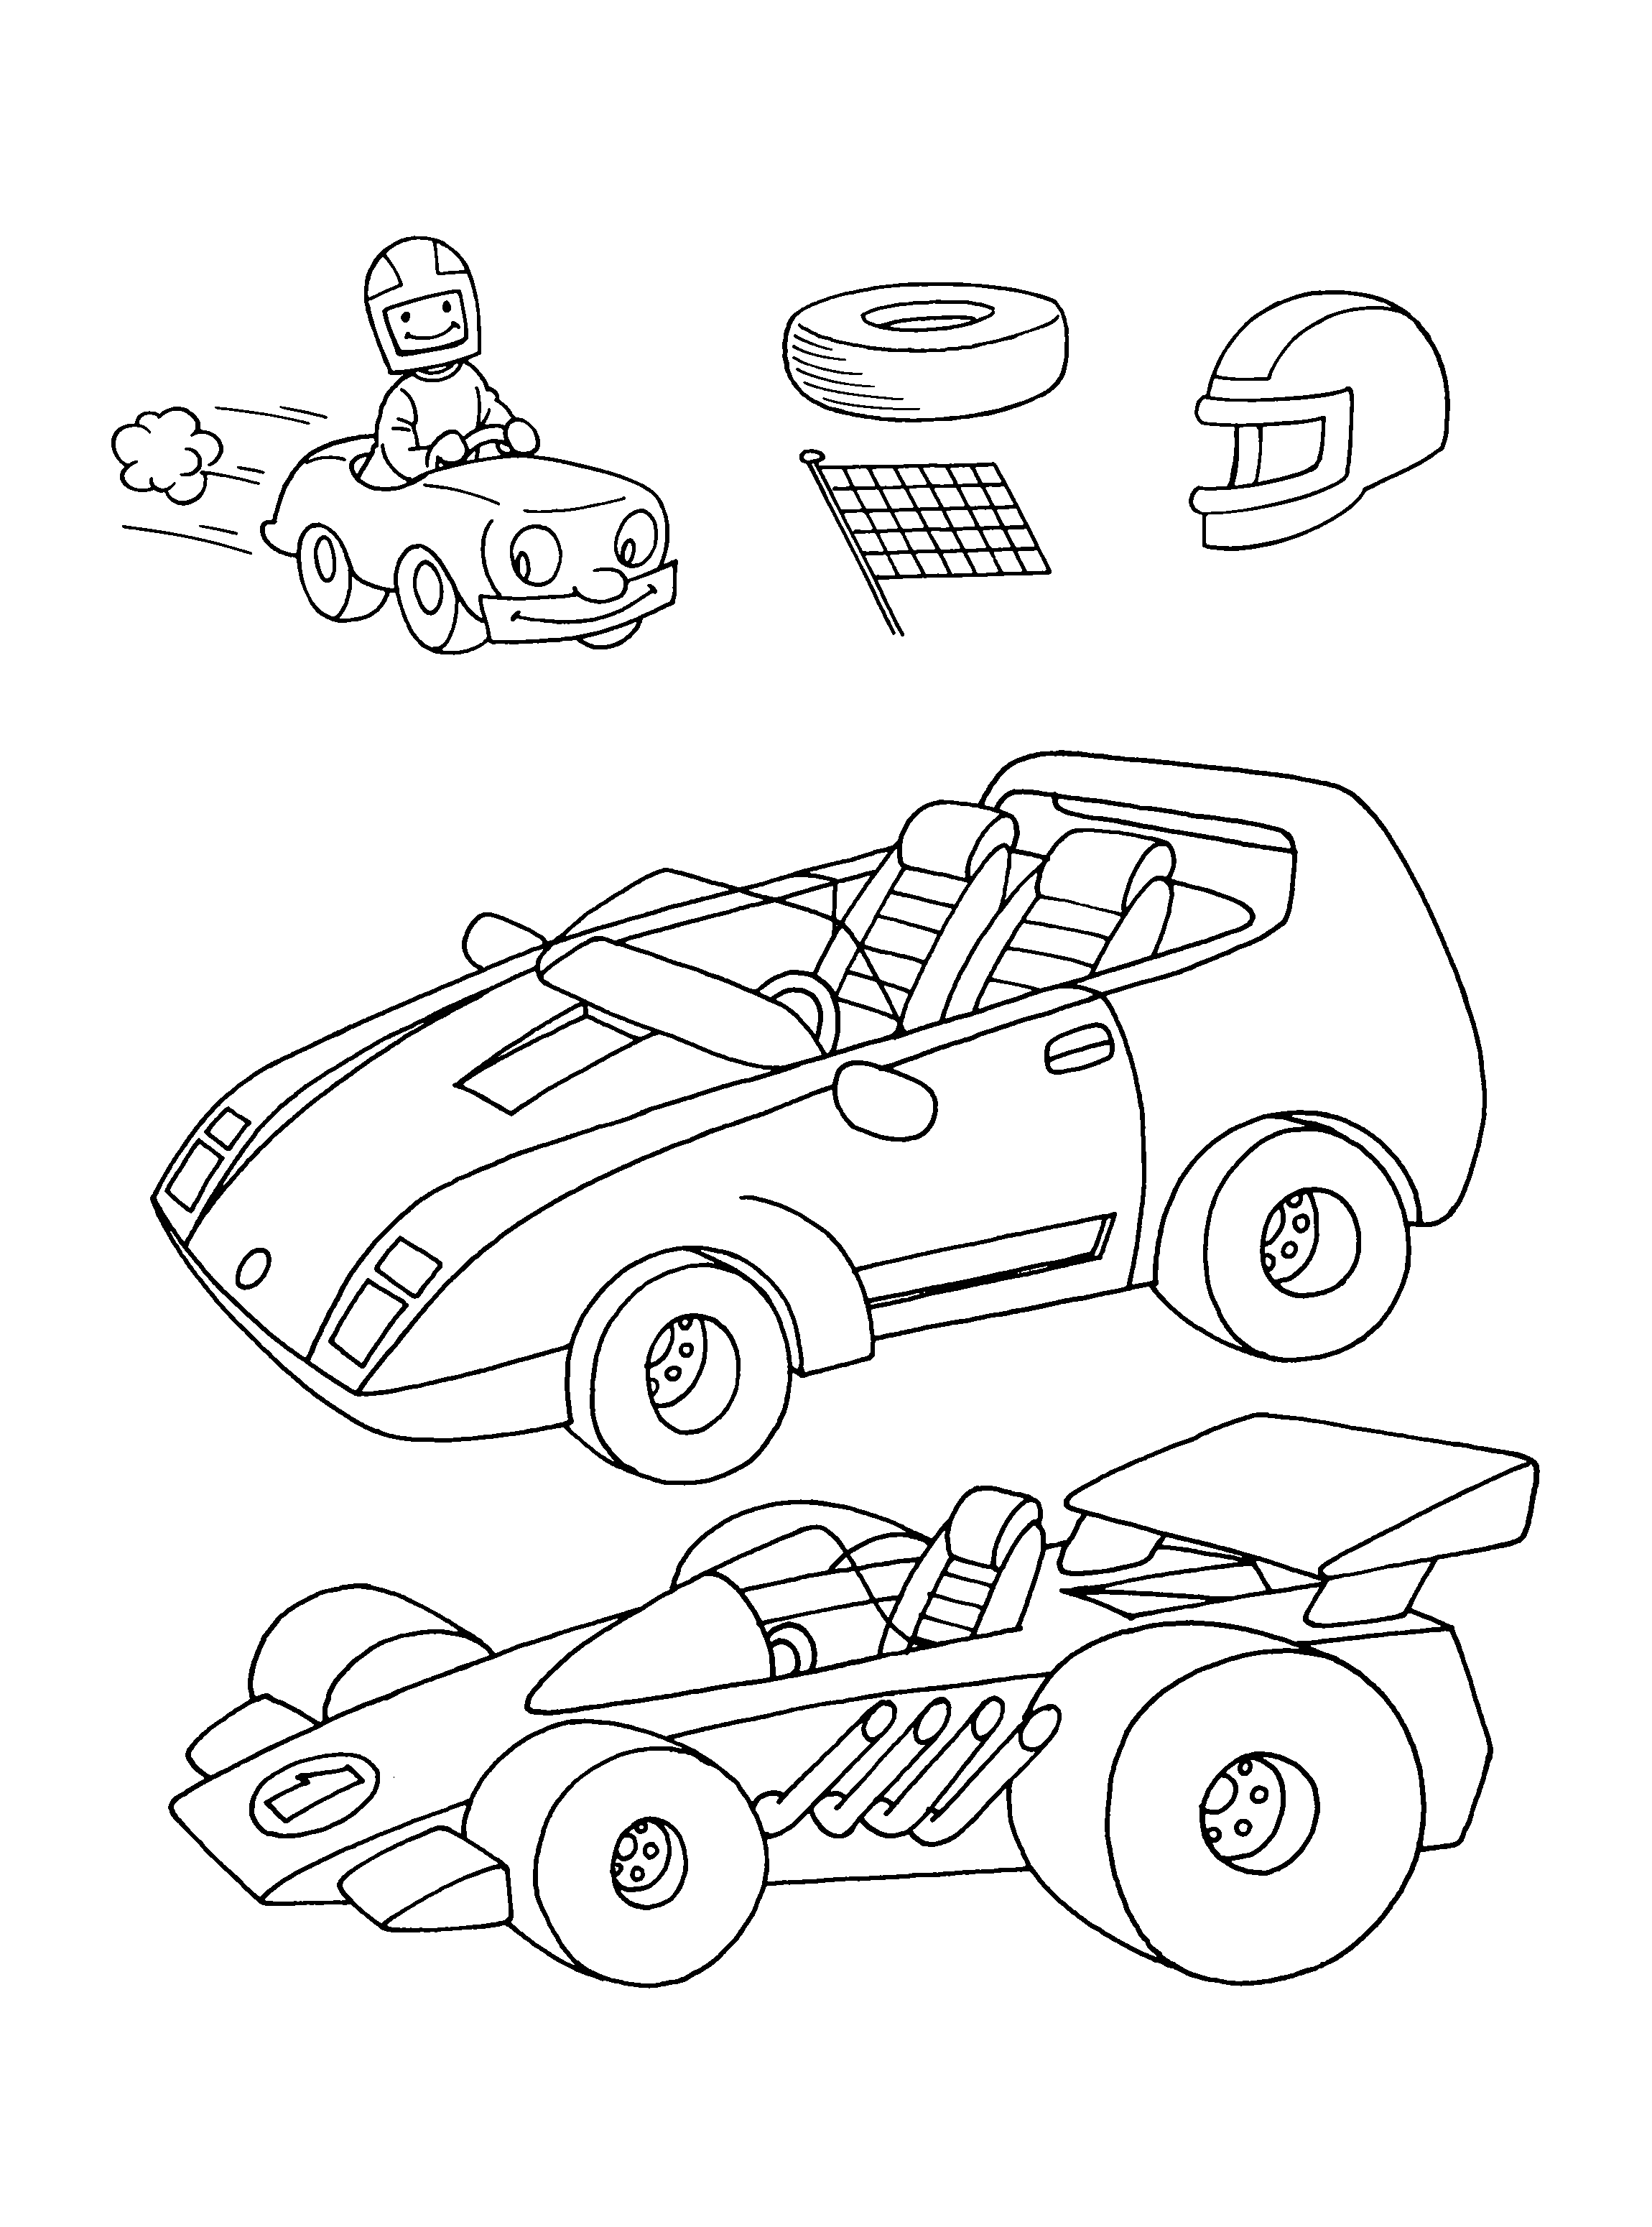 Spike and suzy Coloring Pages - Coloringpages1001.com